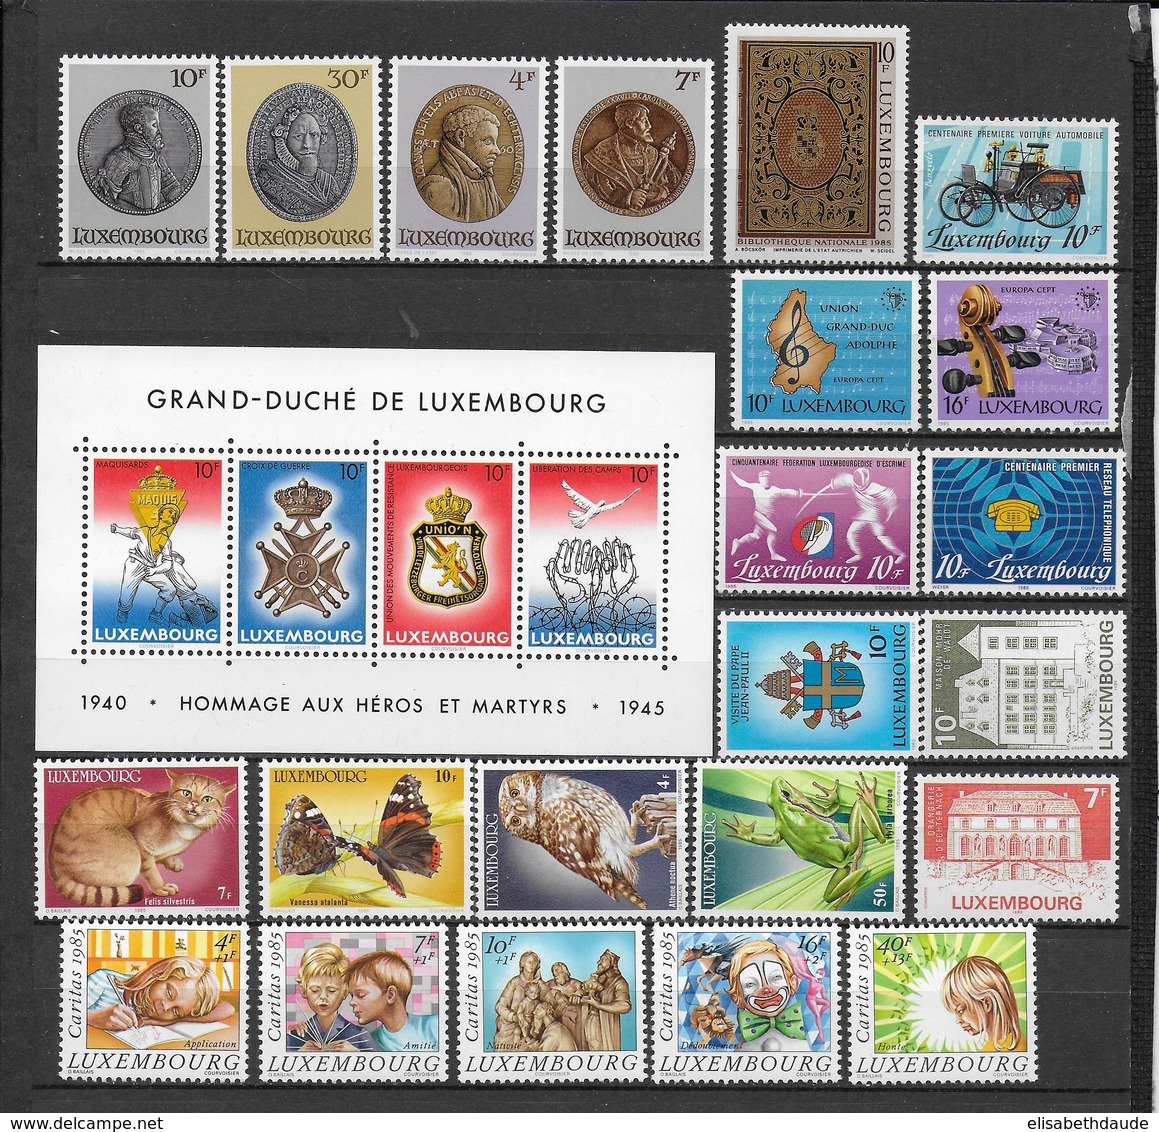 LUXEMBOURG - ANNEE COMPLETE 1985 ** MNH - COTE = 62.5 EUR. - Años Completos